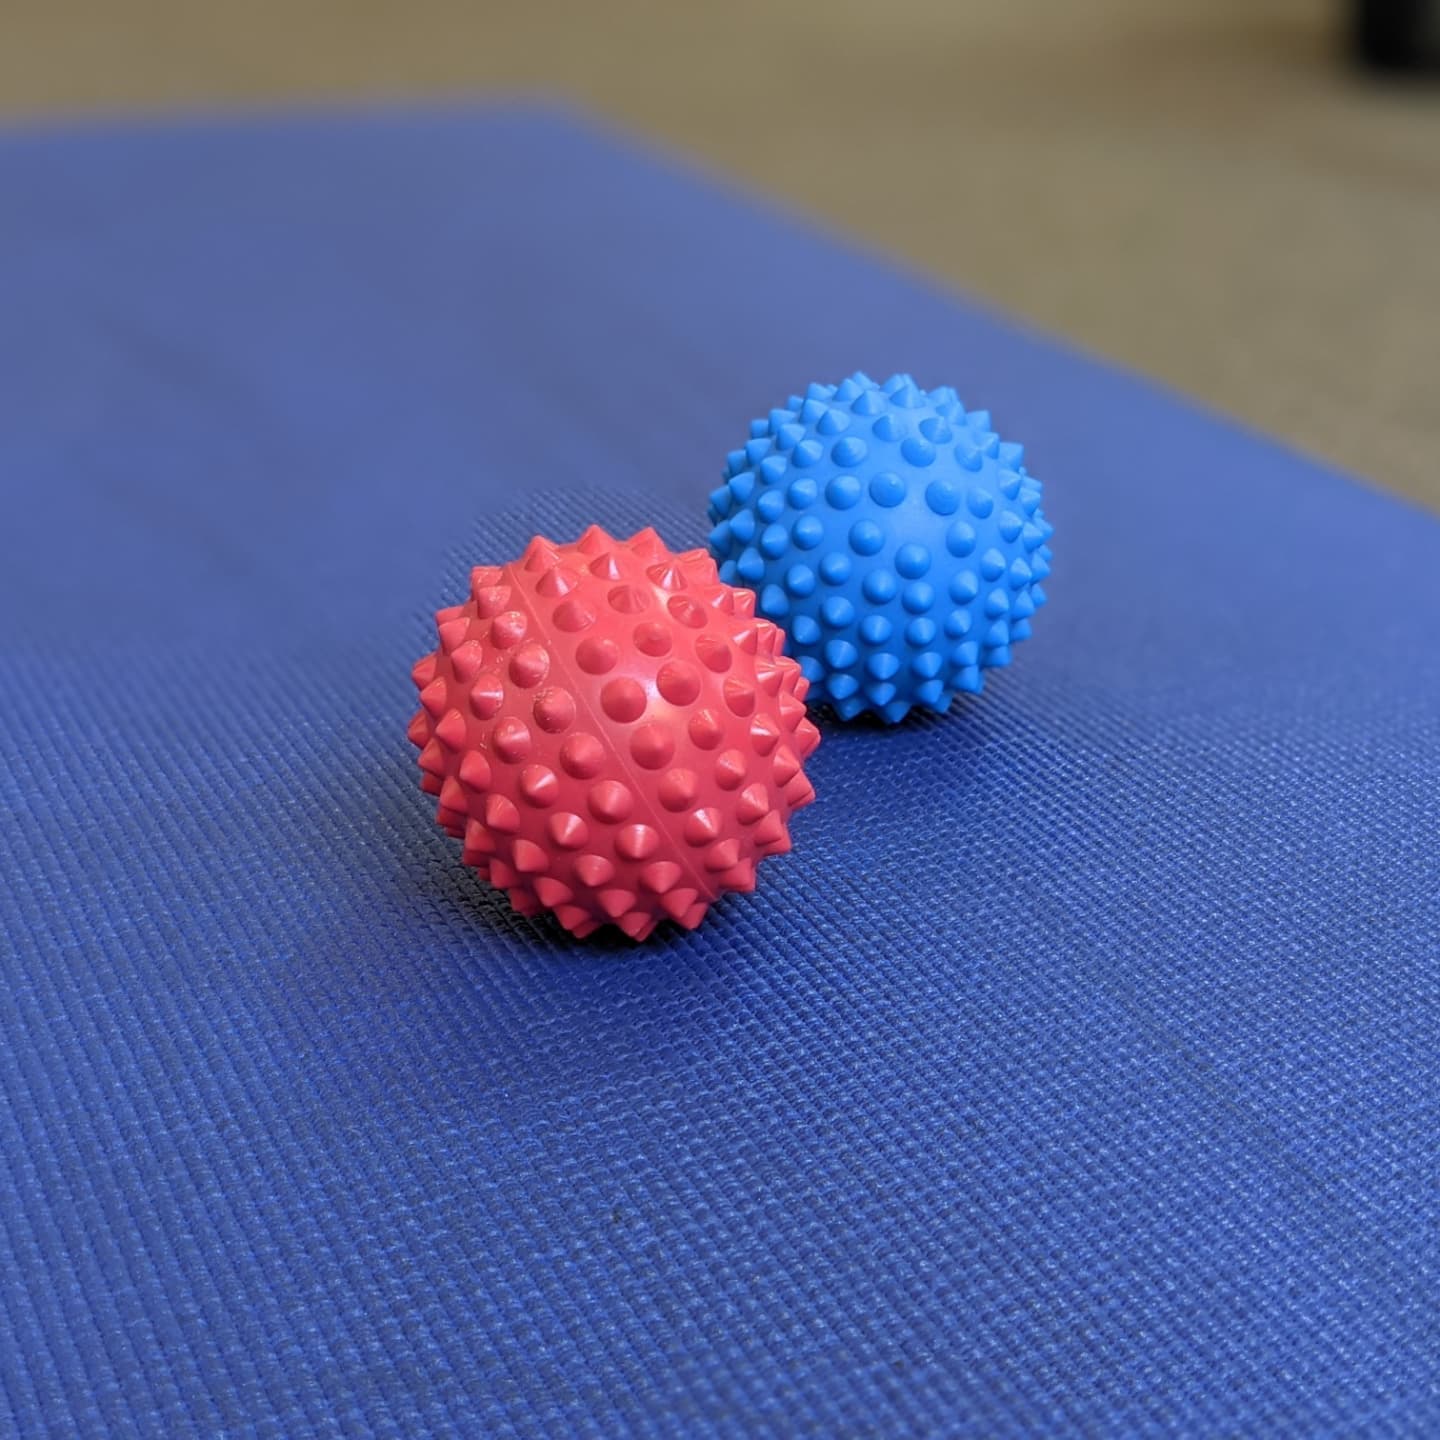 Are you struggling to find some extra little gifts for Christmas?SPIKEY BALLS are a fantastic way to release tight sore muscles at home or if you are away for the holidays!  They also make great little stocking fillers or Secret Santa gifts!